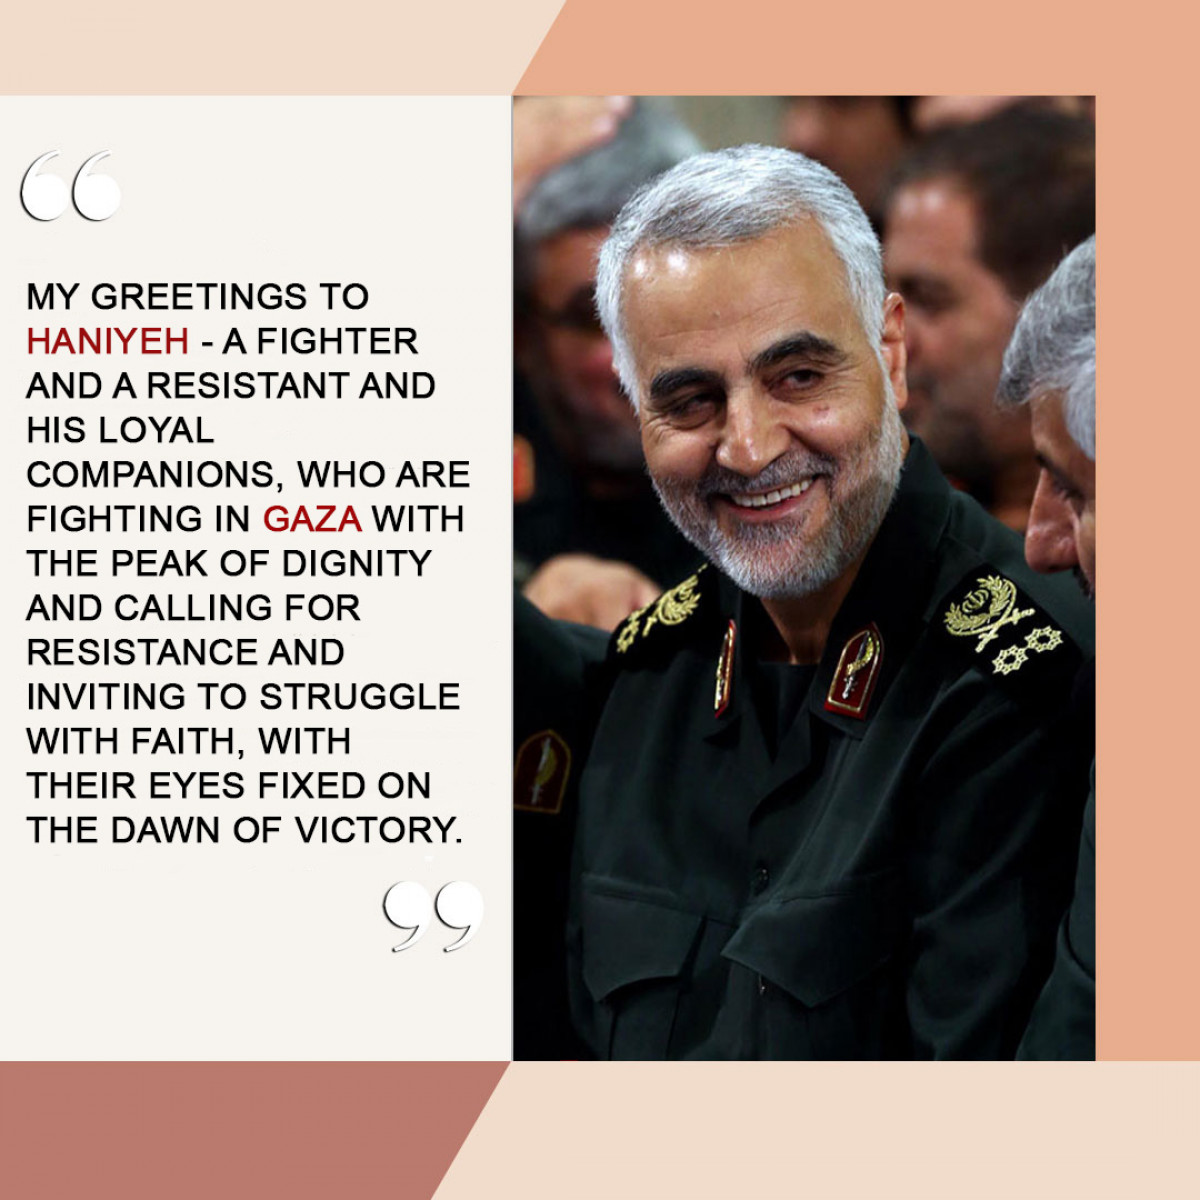 MY GREETINGS TO HANIYEH - A FIGHTER